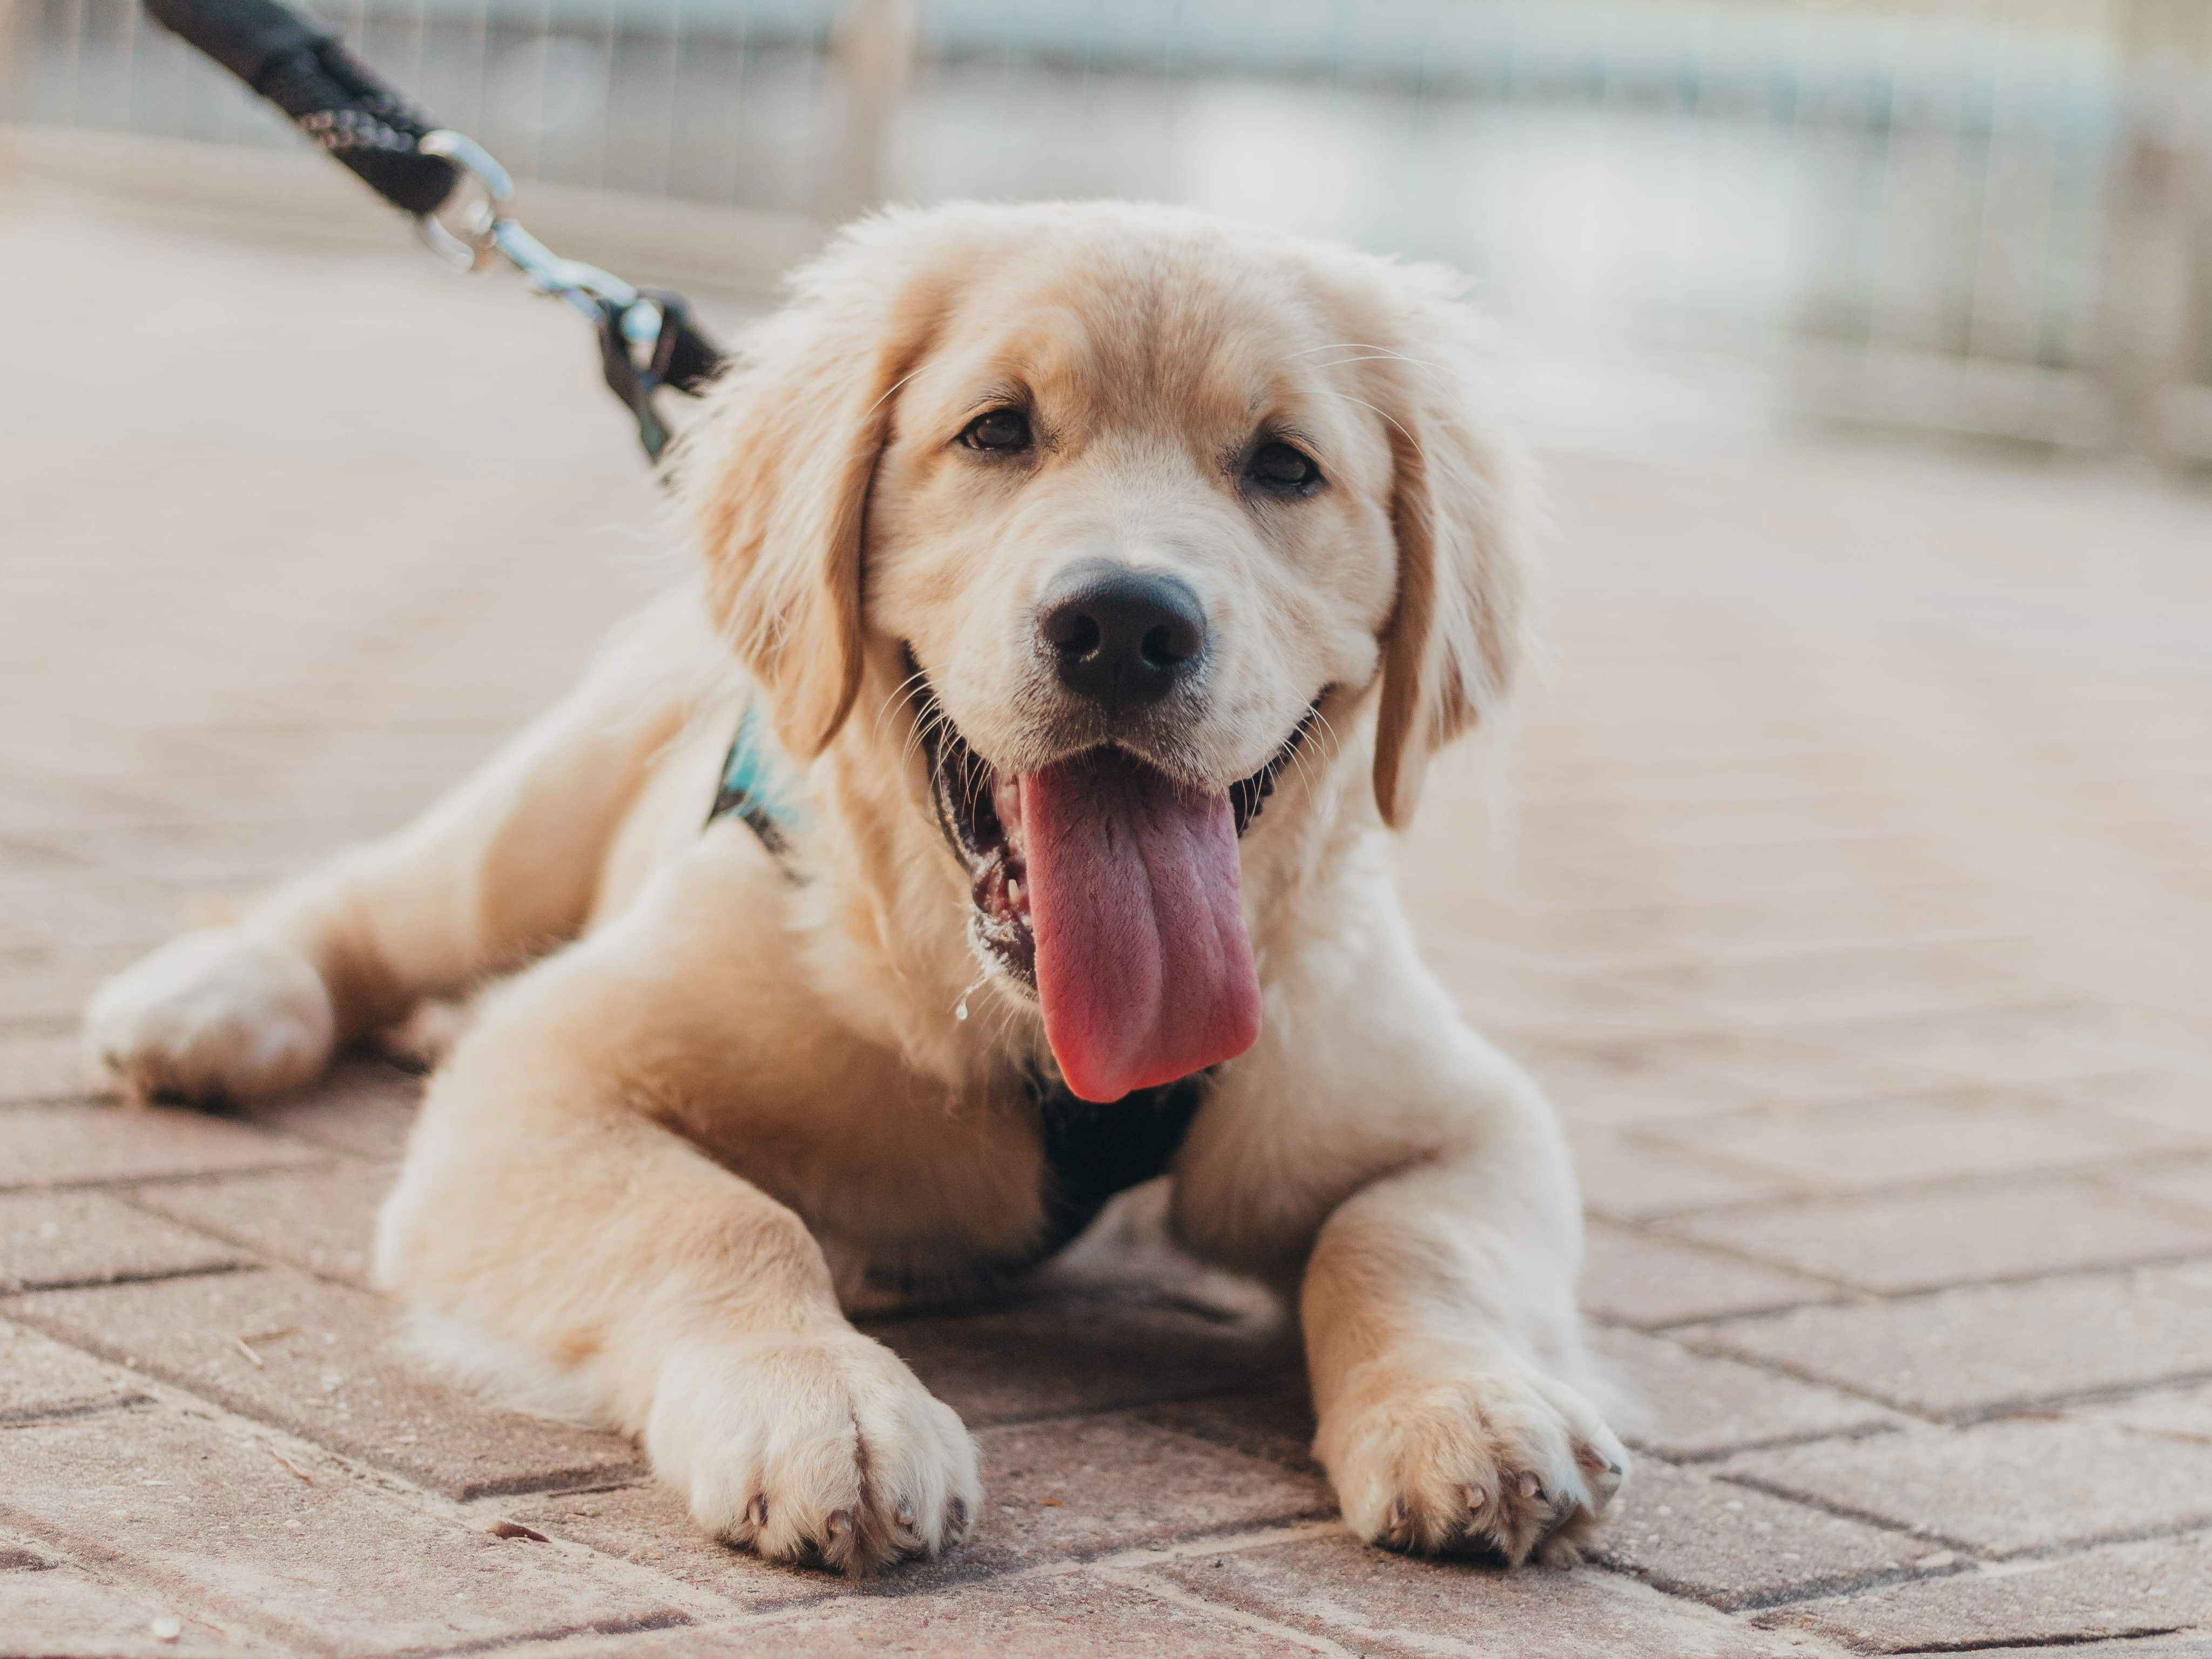 Preparing for the Arrival: 5 Signs Your Golden Retriever is About to Give Birth